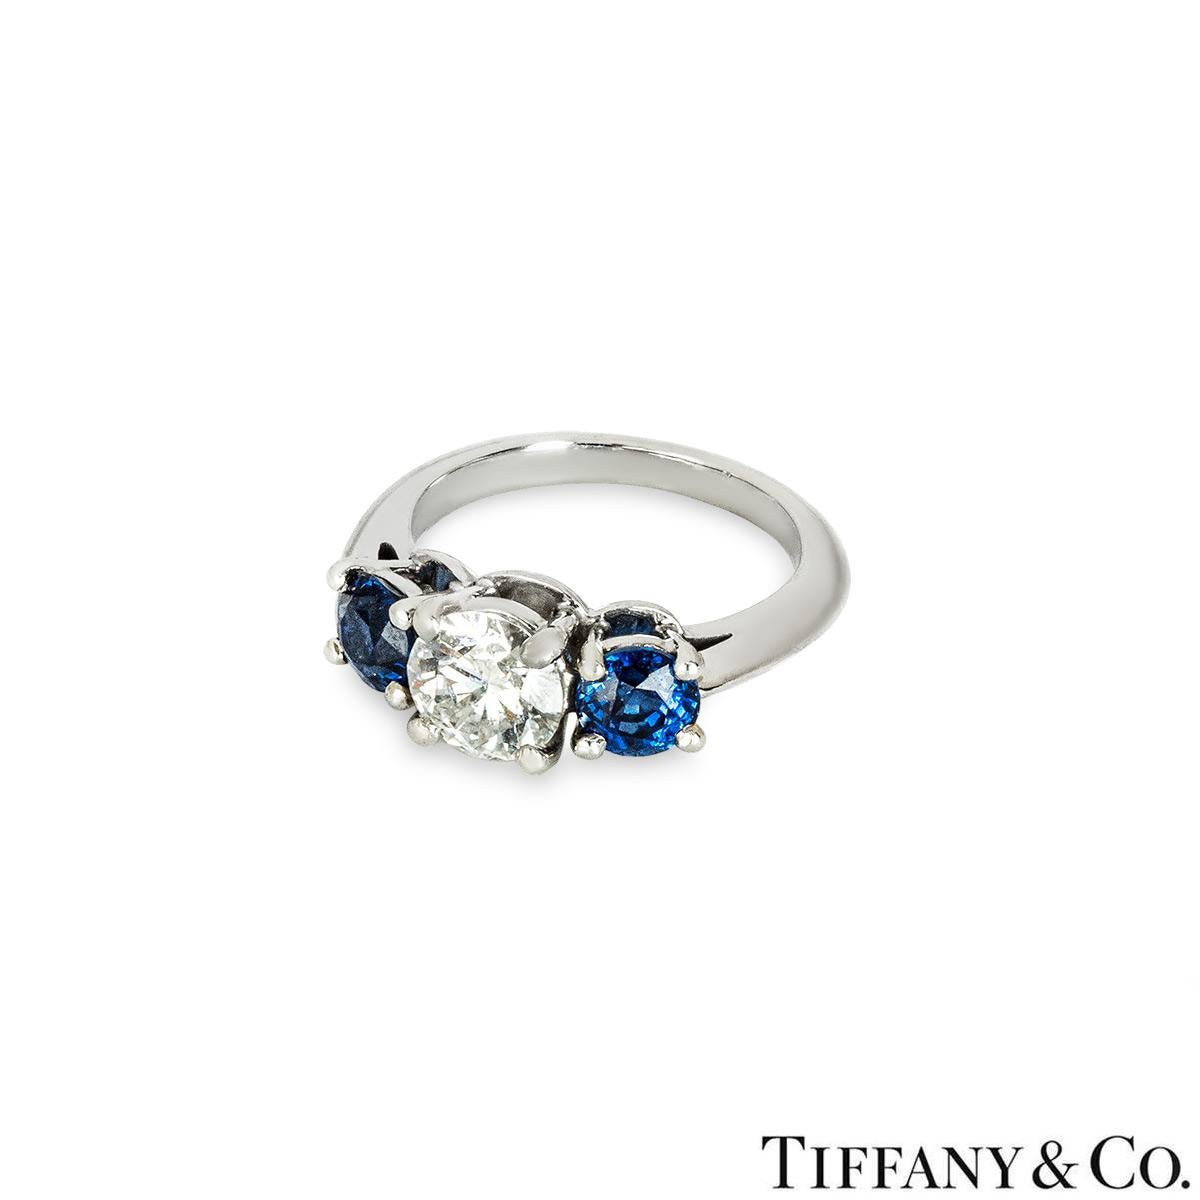 Tiffany & Co. Platinum Diamond and Sapphire Ring 1.06ct E/VS1 In Excellent Condition For Sale In London, GB